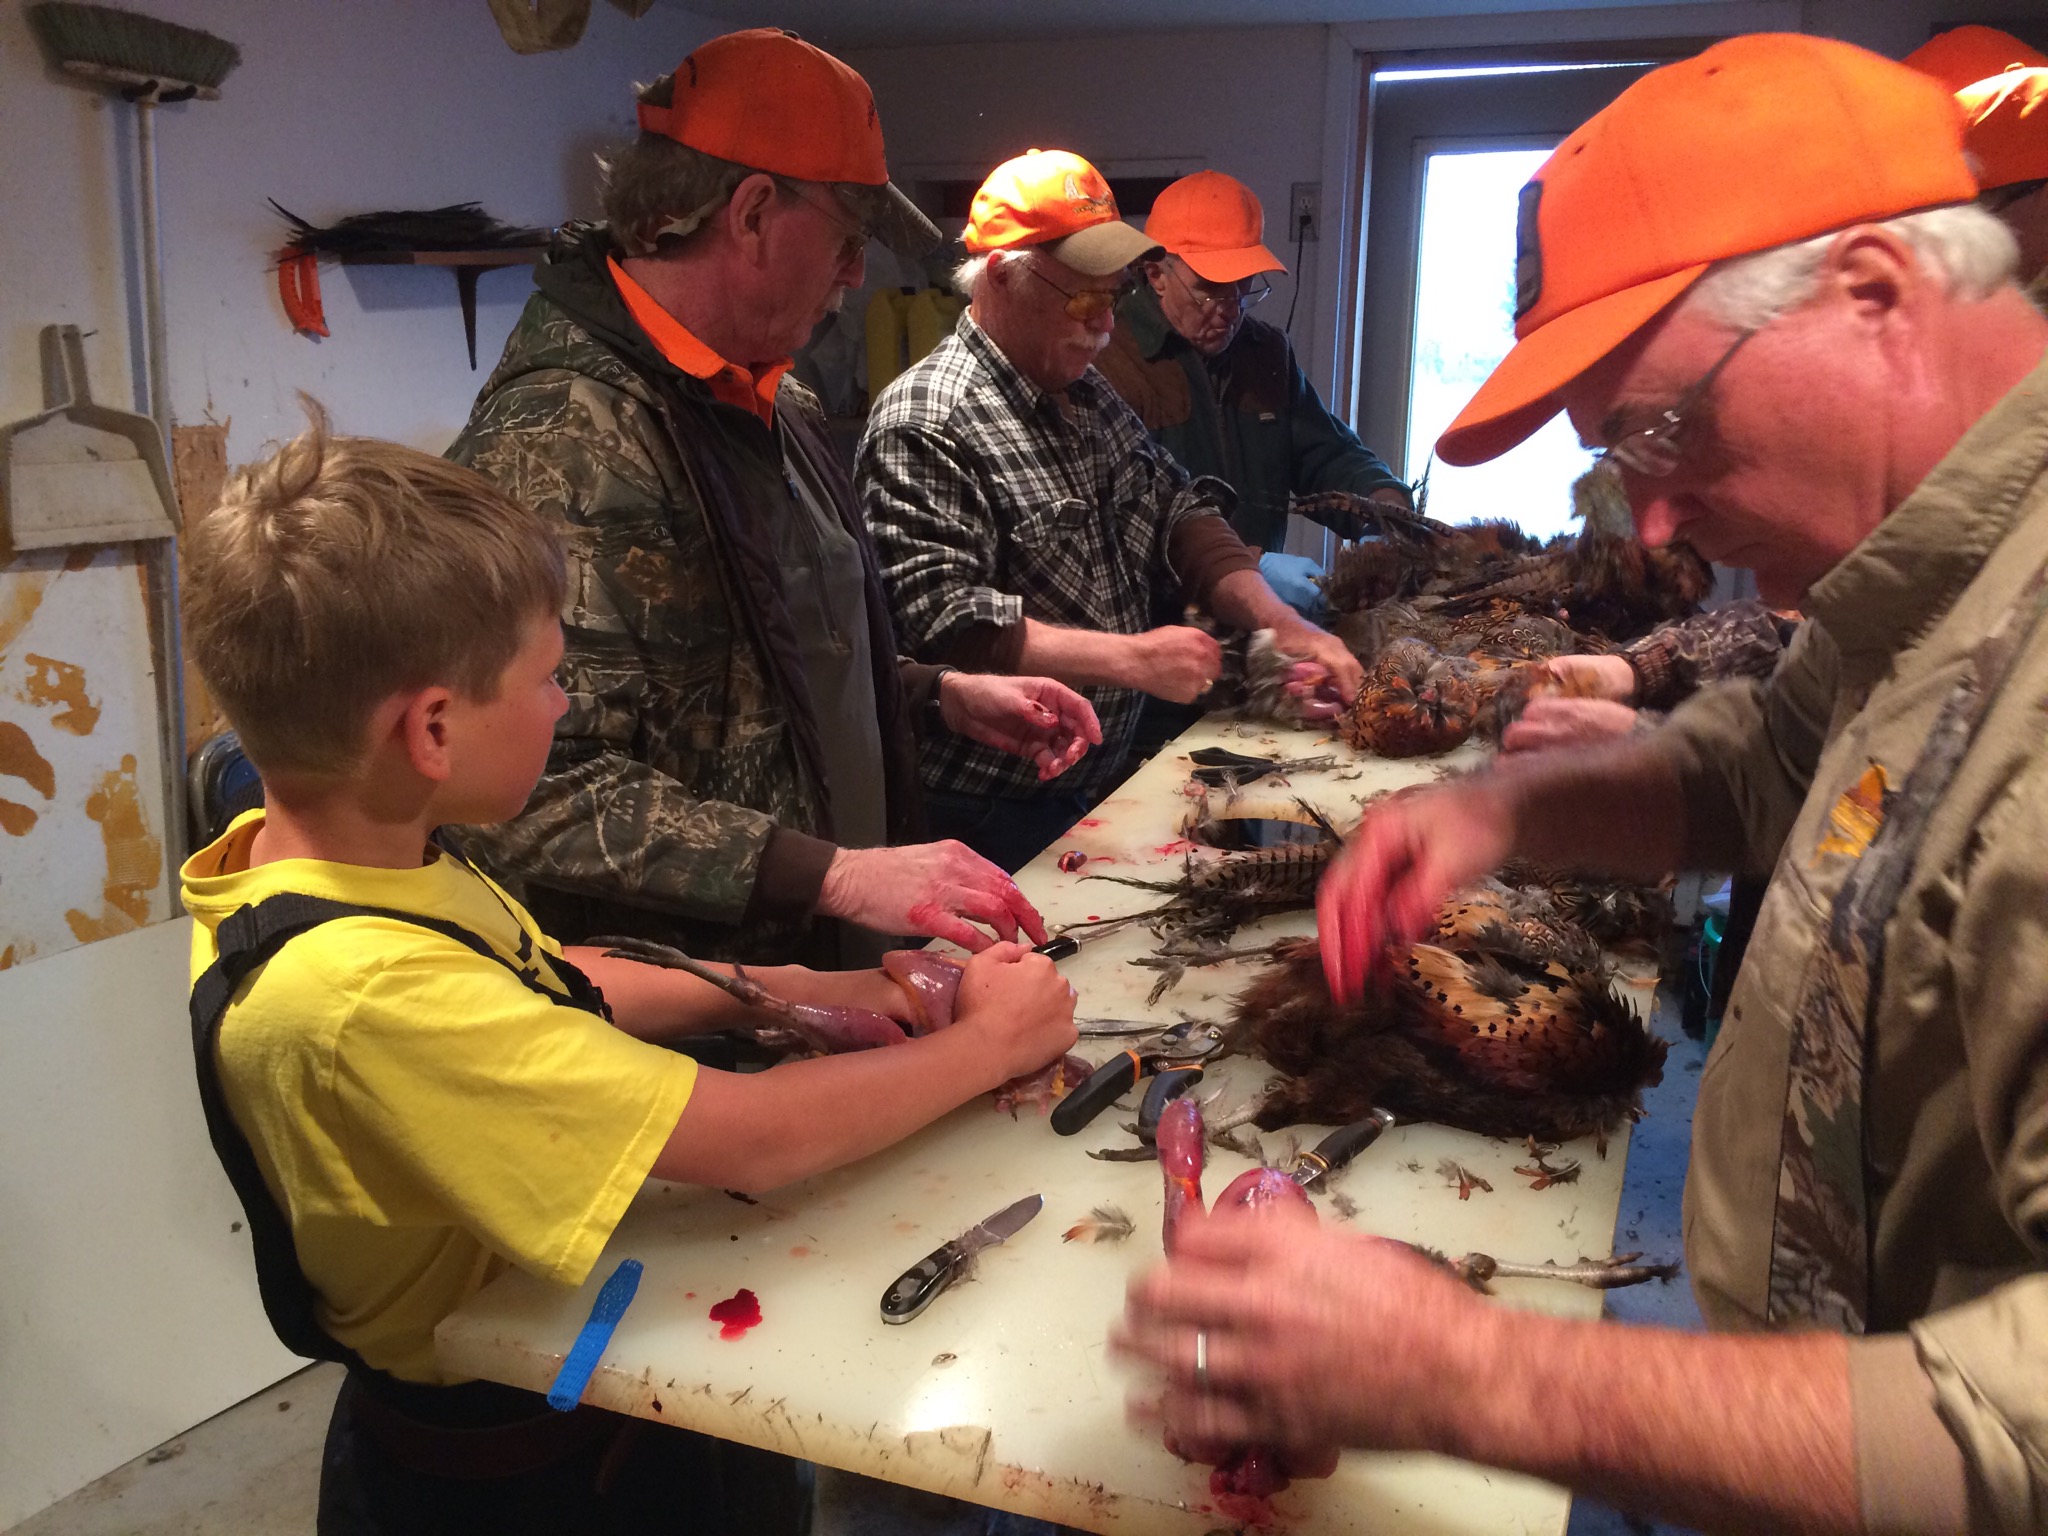 Cleaning the days pheasants with our hunting friends Mike, Jim, Bob, and Ray pictured.